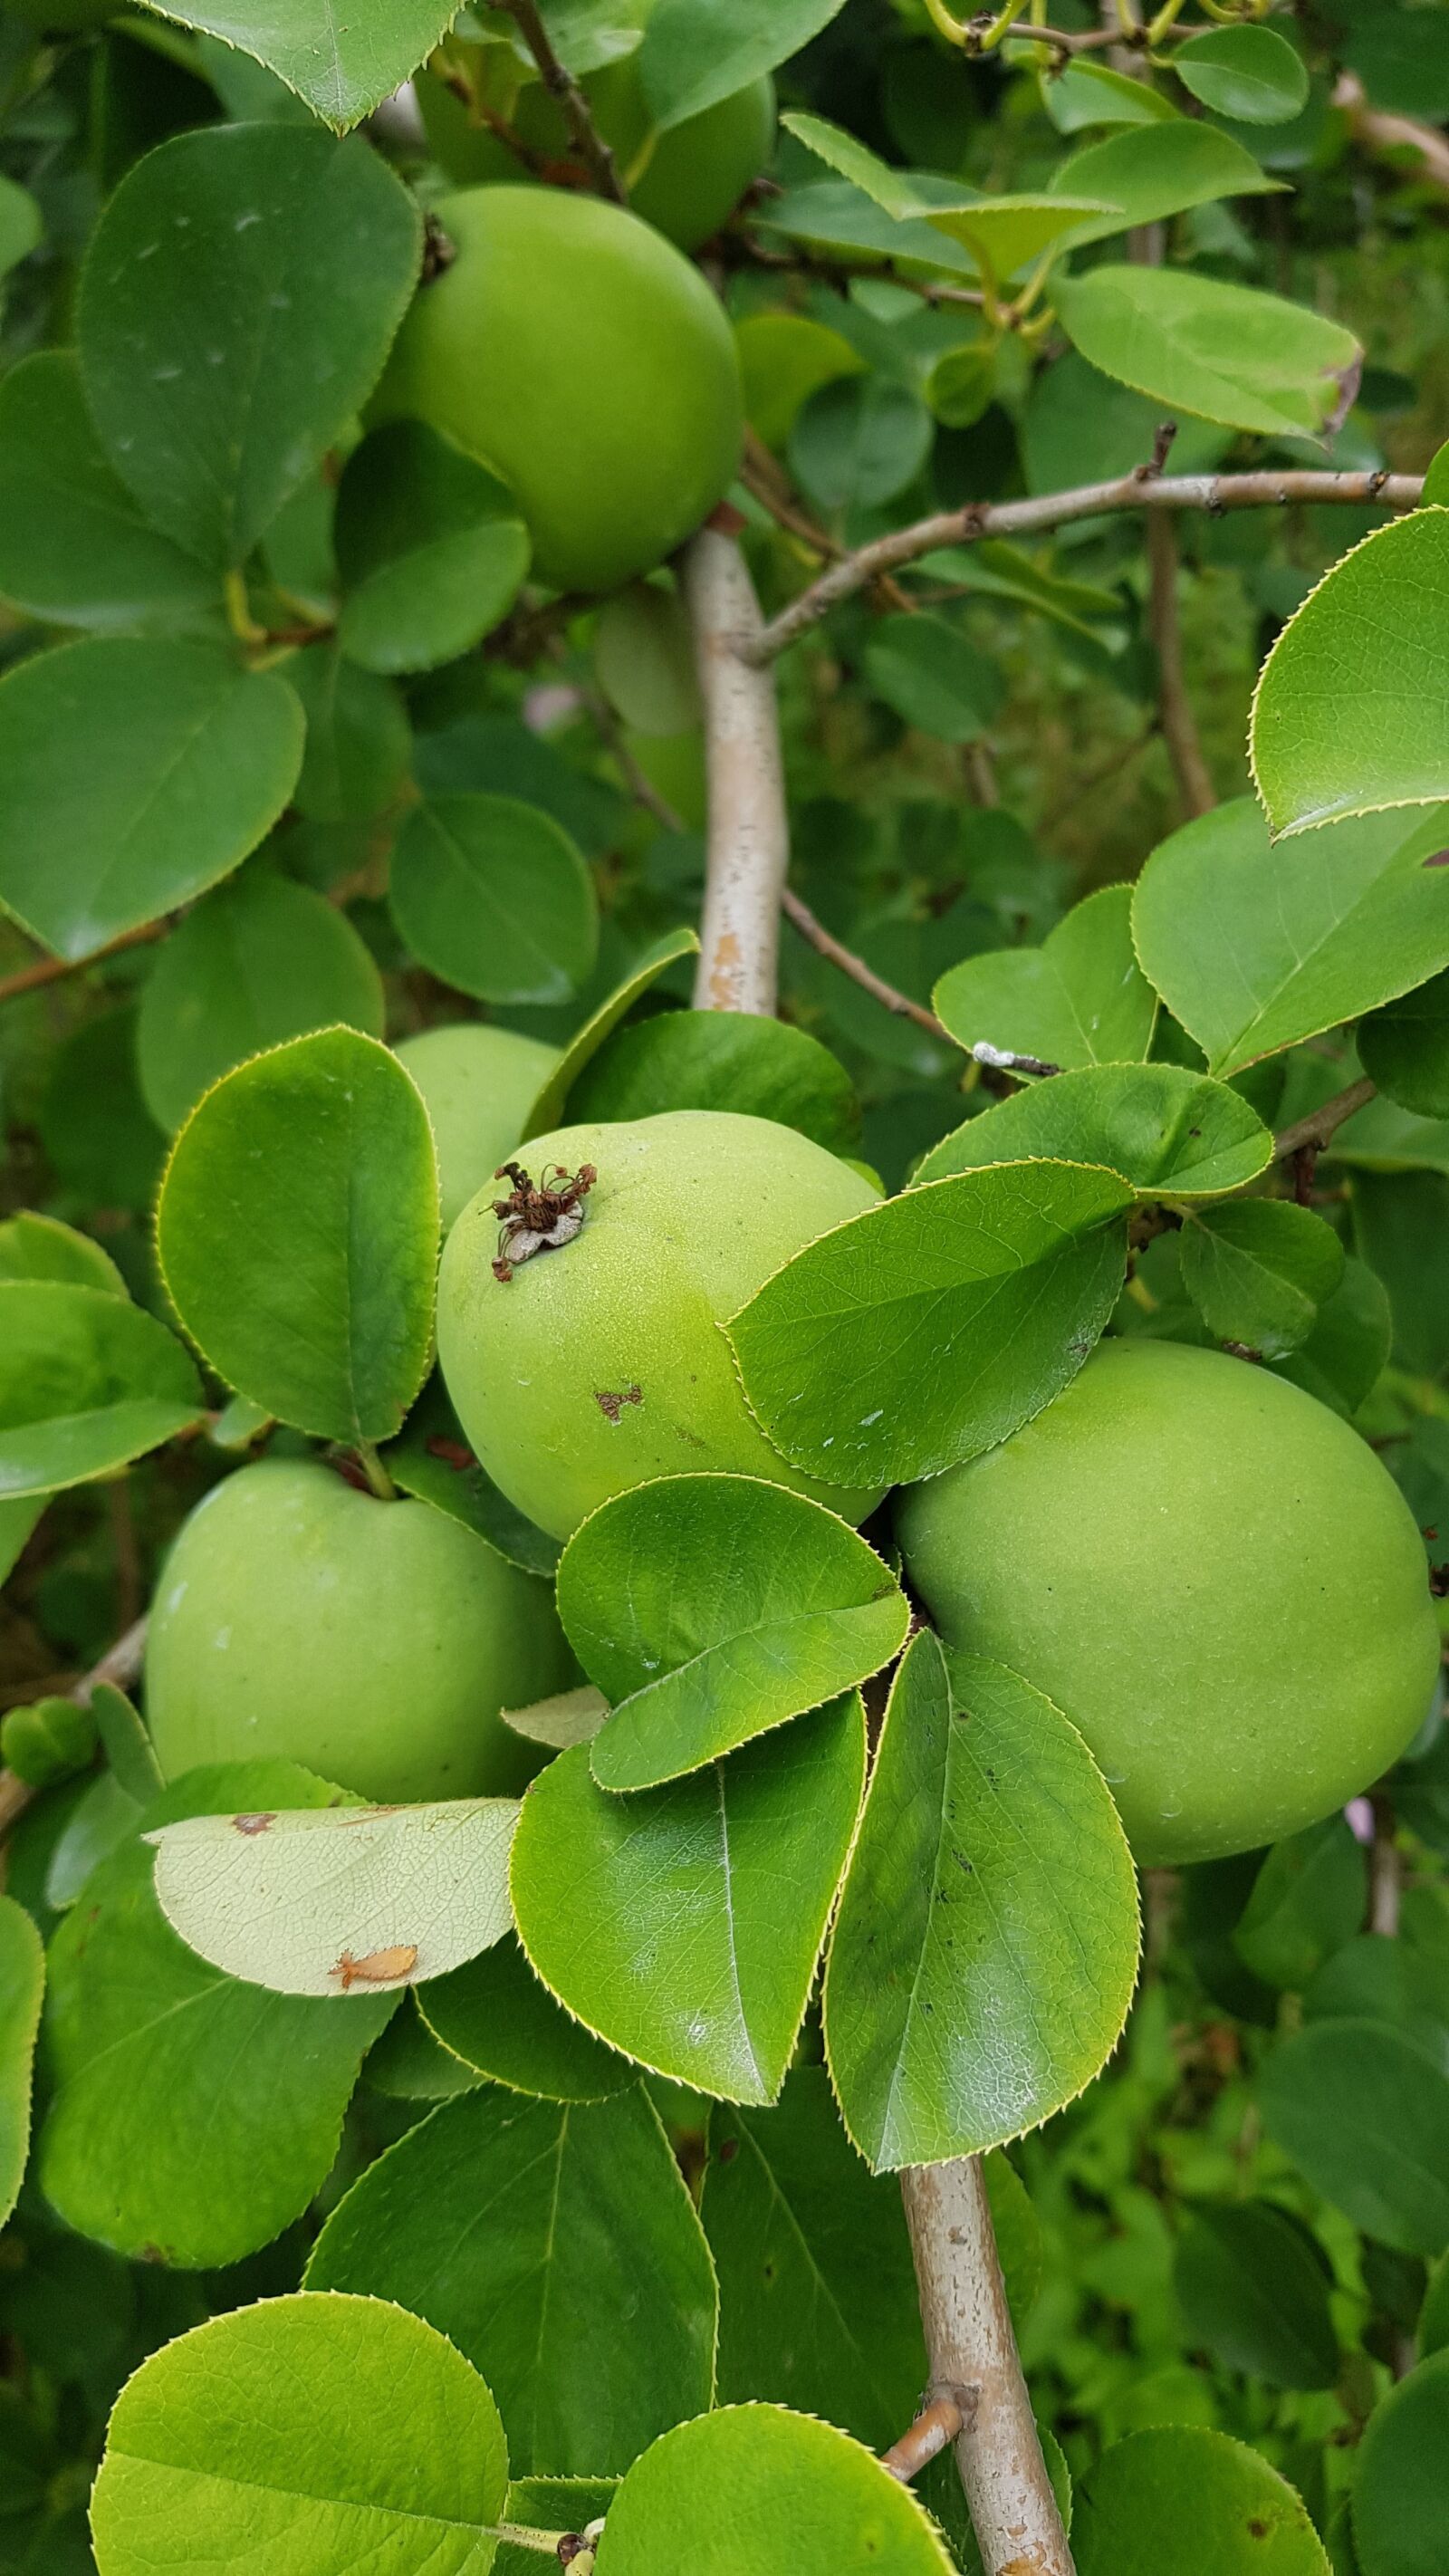 Samsung Galaxy S8 sample photo. Chinese quince, plants, abstract photography